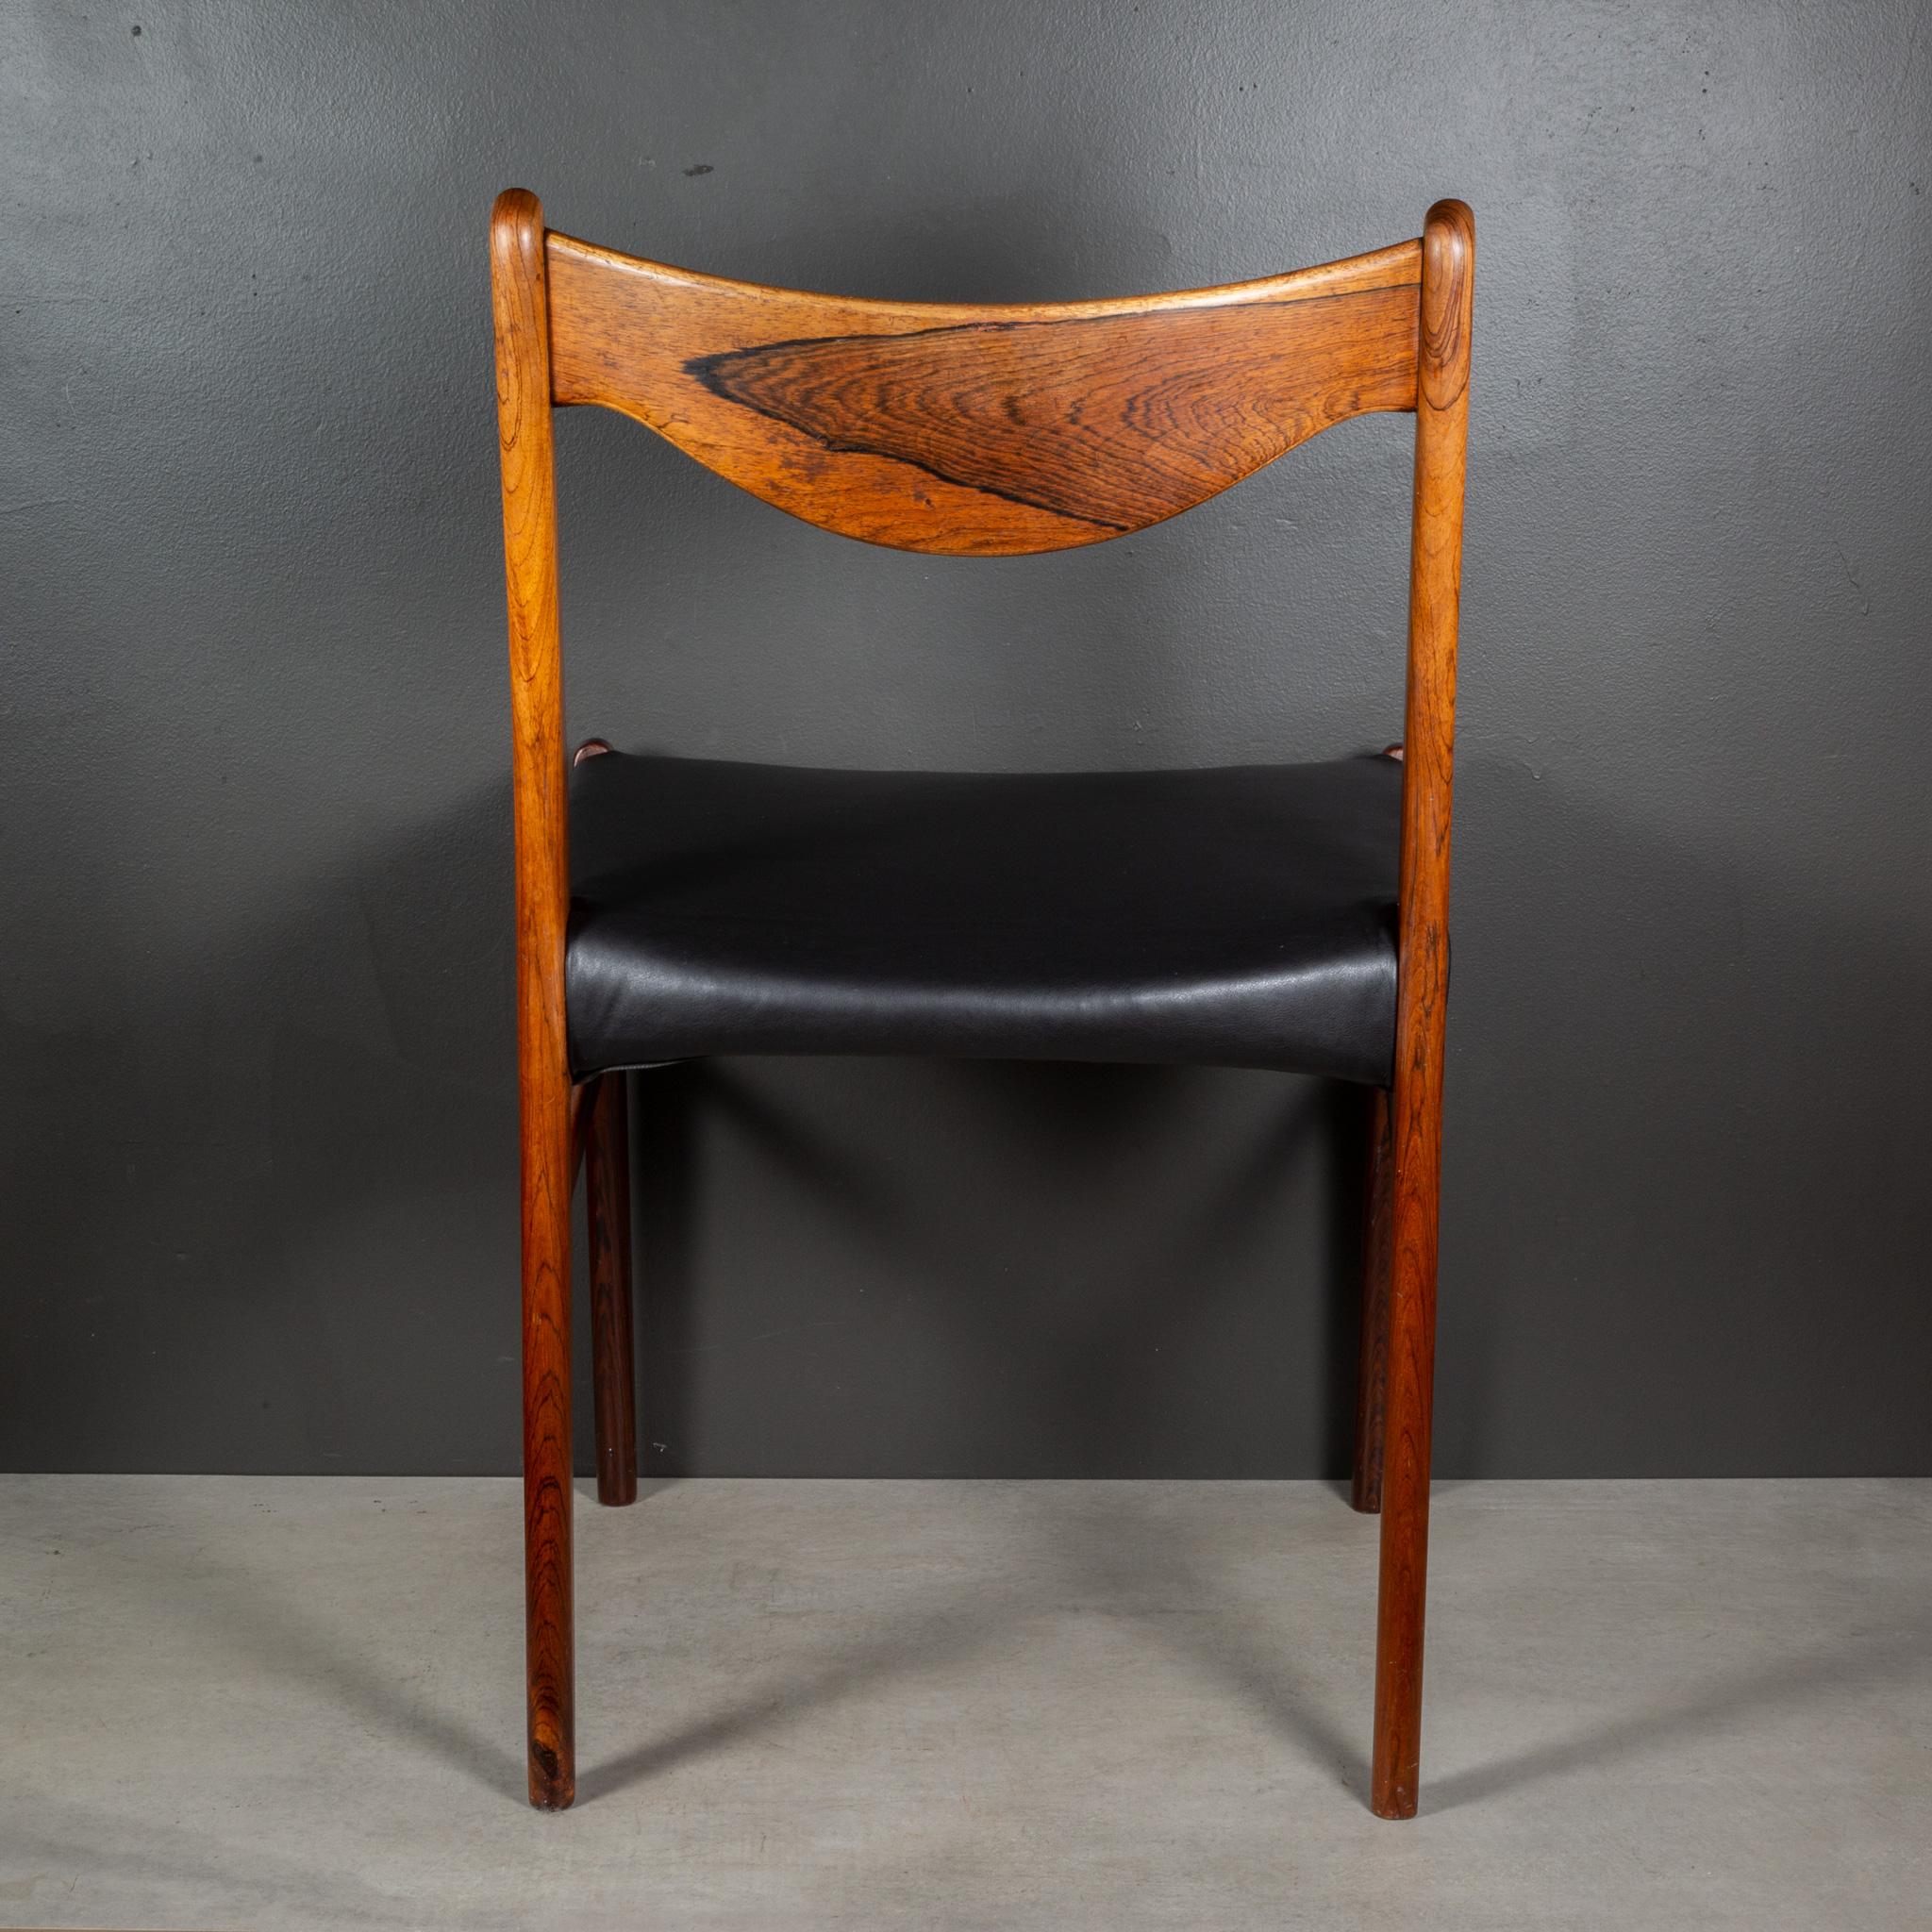 Arne Wahl Iversen Model GS61 Rosewood and Leather Dining Chairs c.1950 For Sale 3